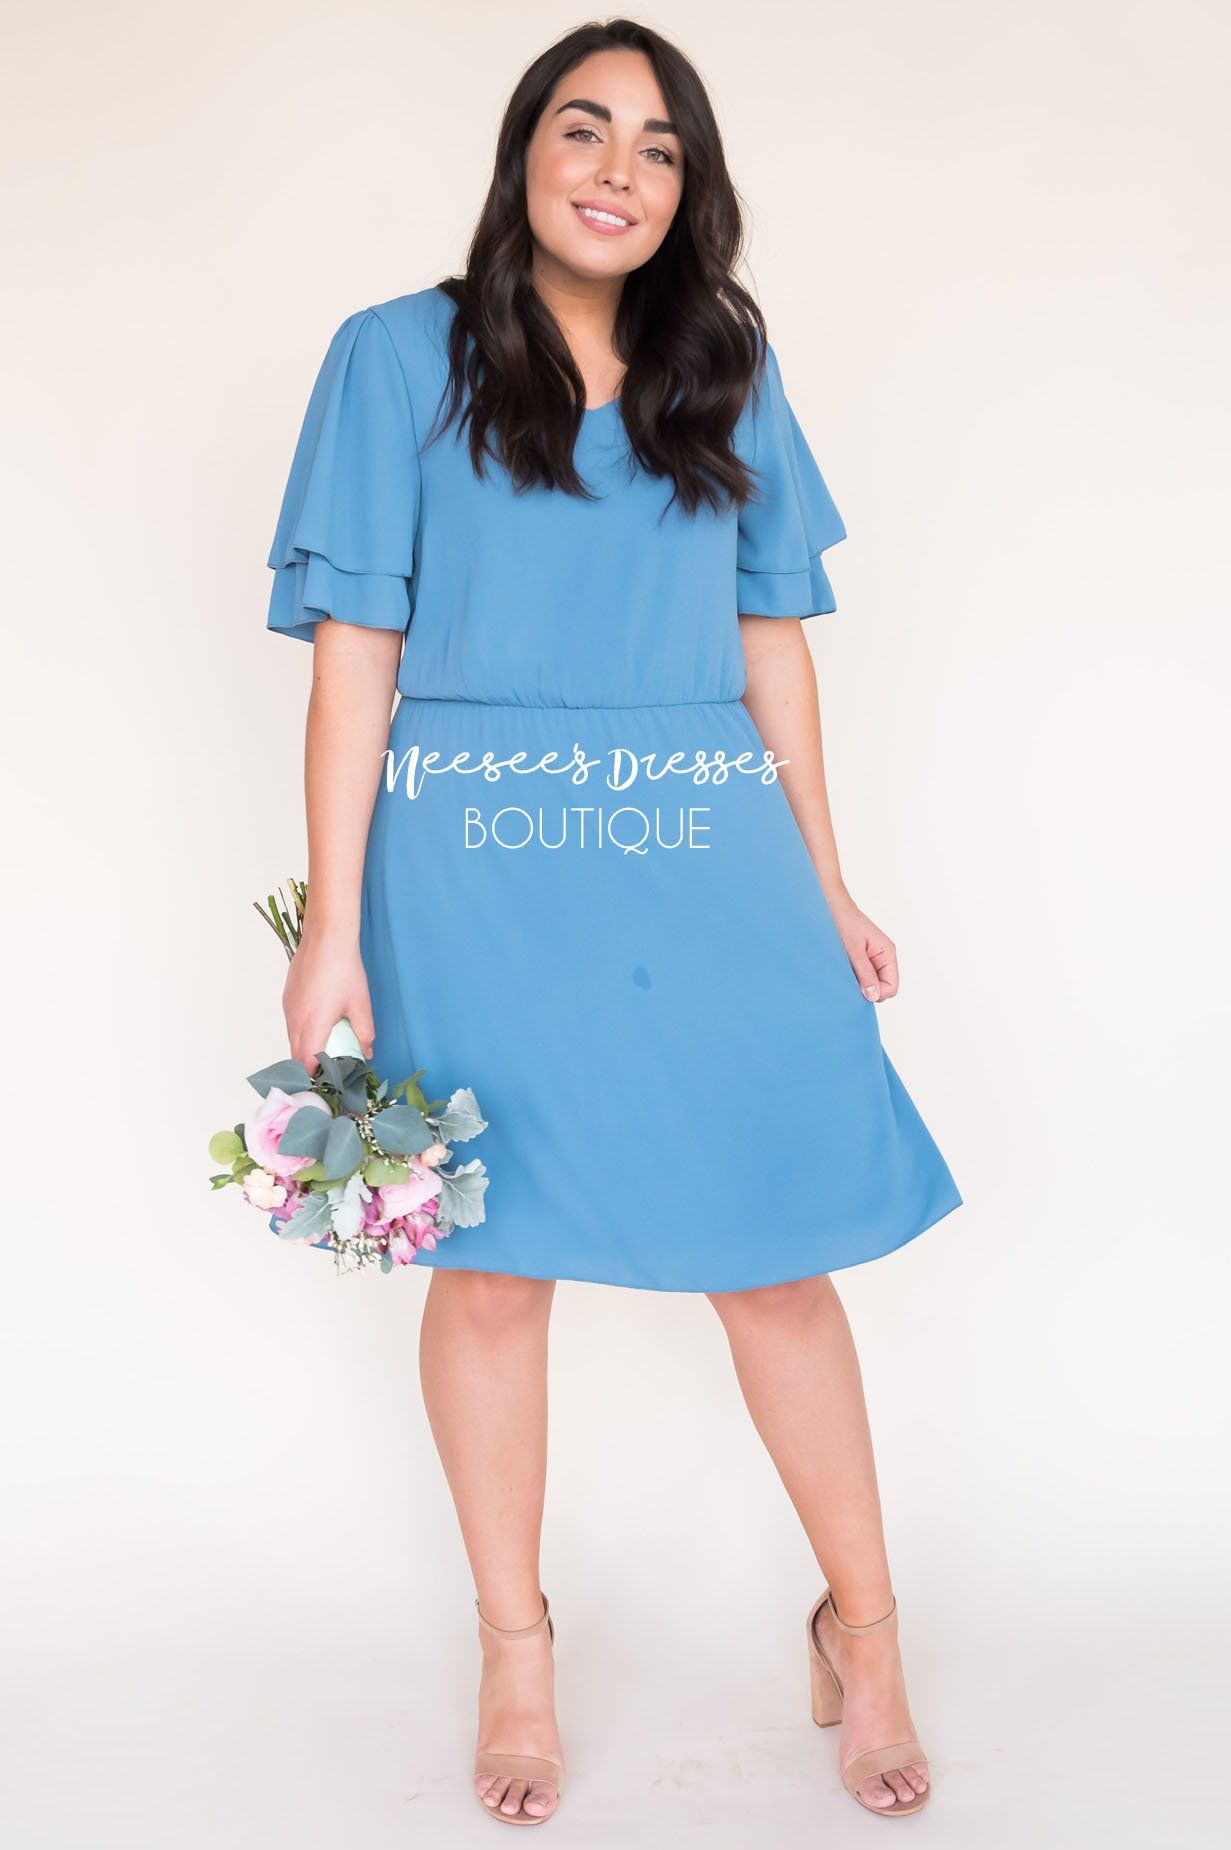 The Claire Modest Mid-Length Dress - NeeSee's Dresses